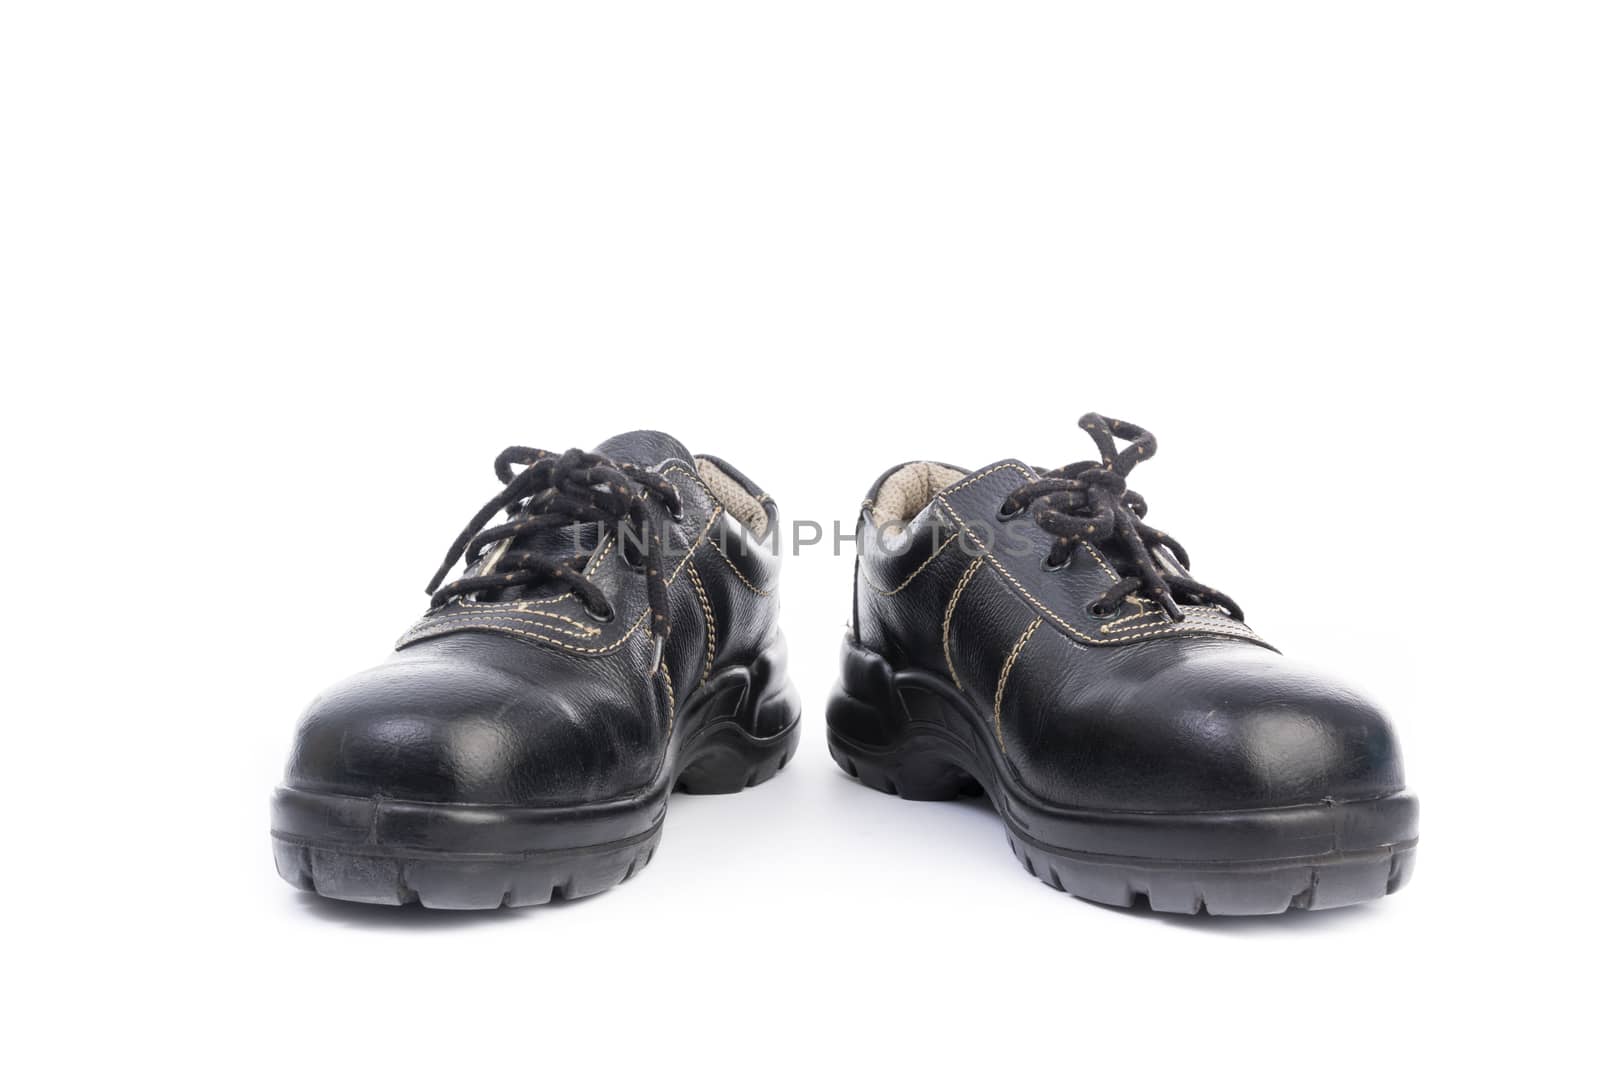 Black Safety Shoe Isolated by Sorapop